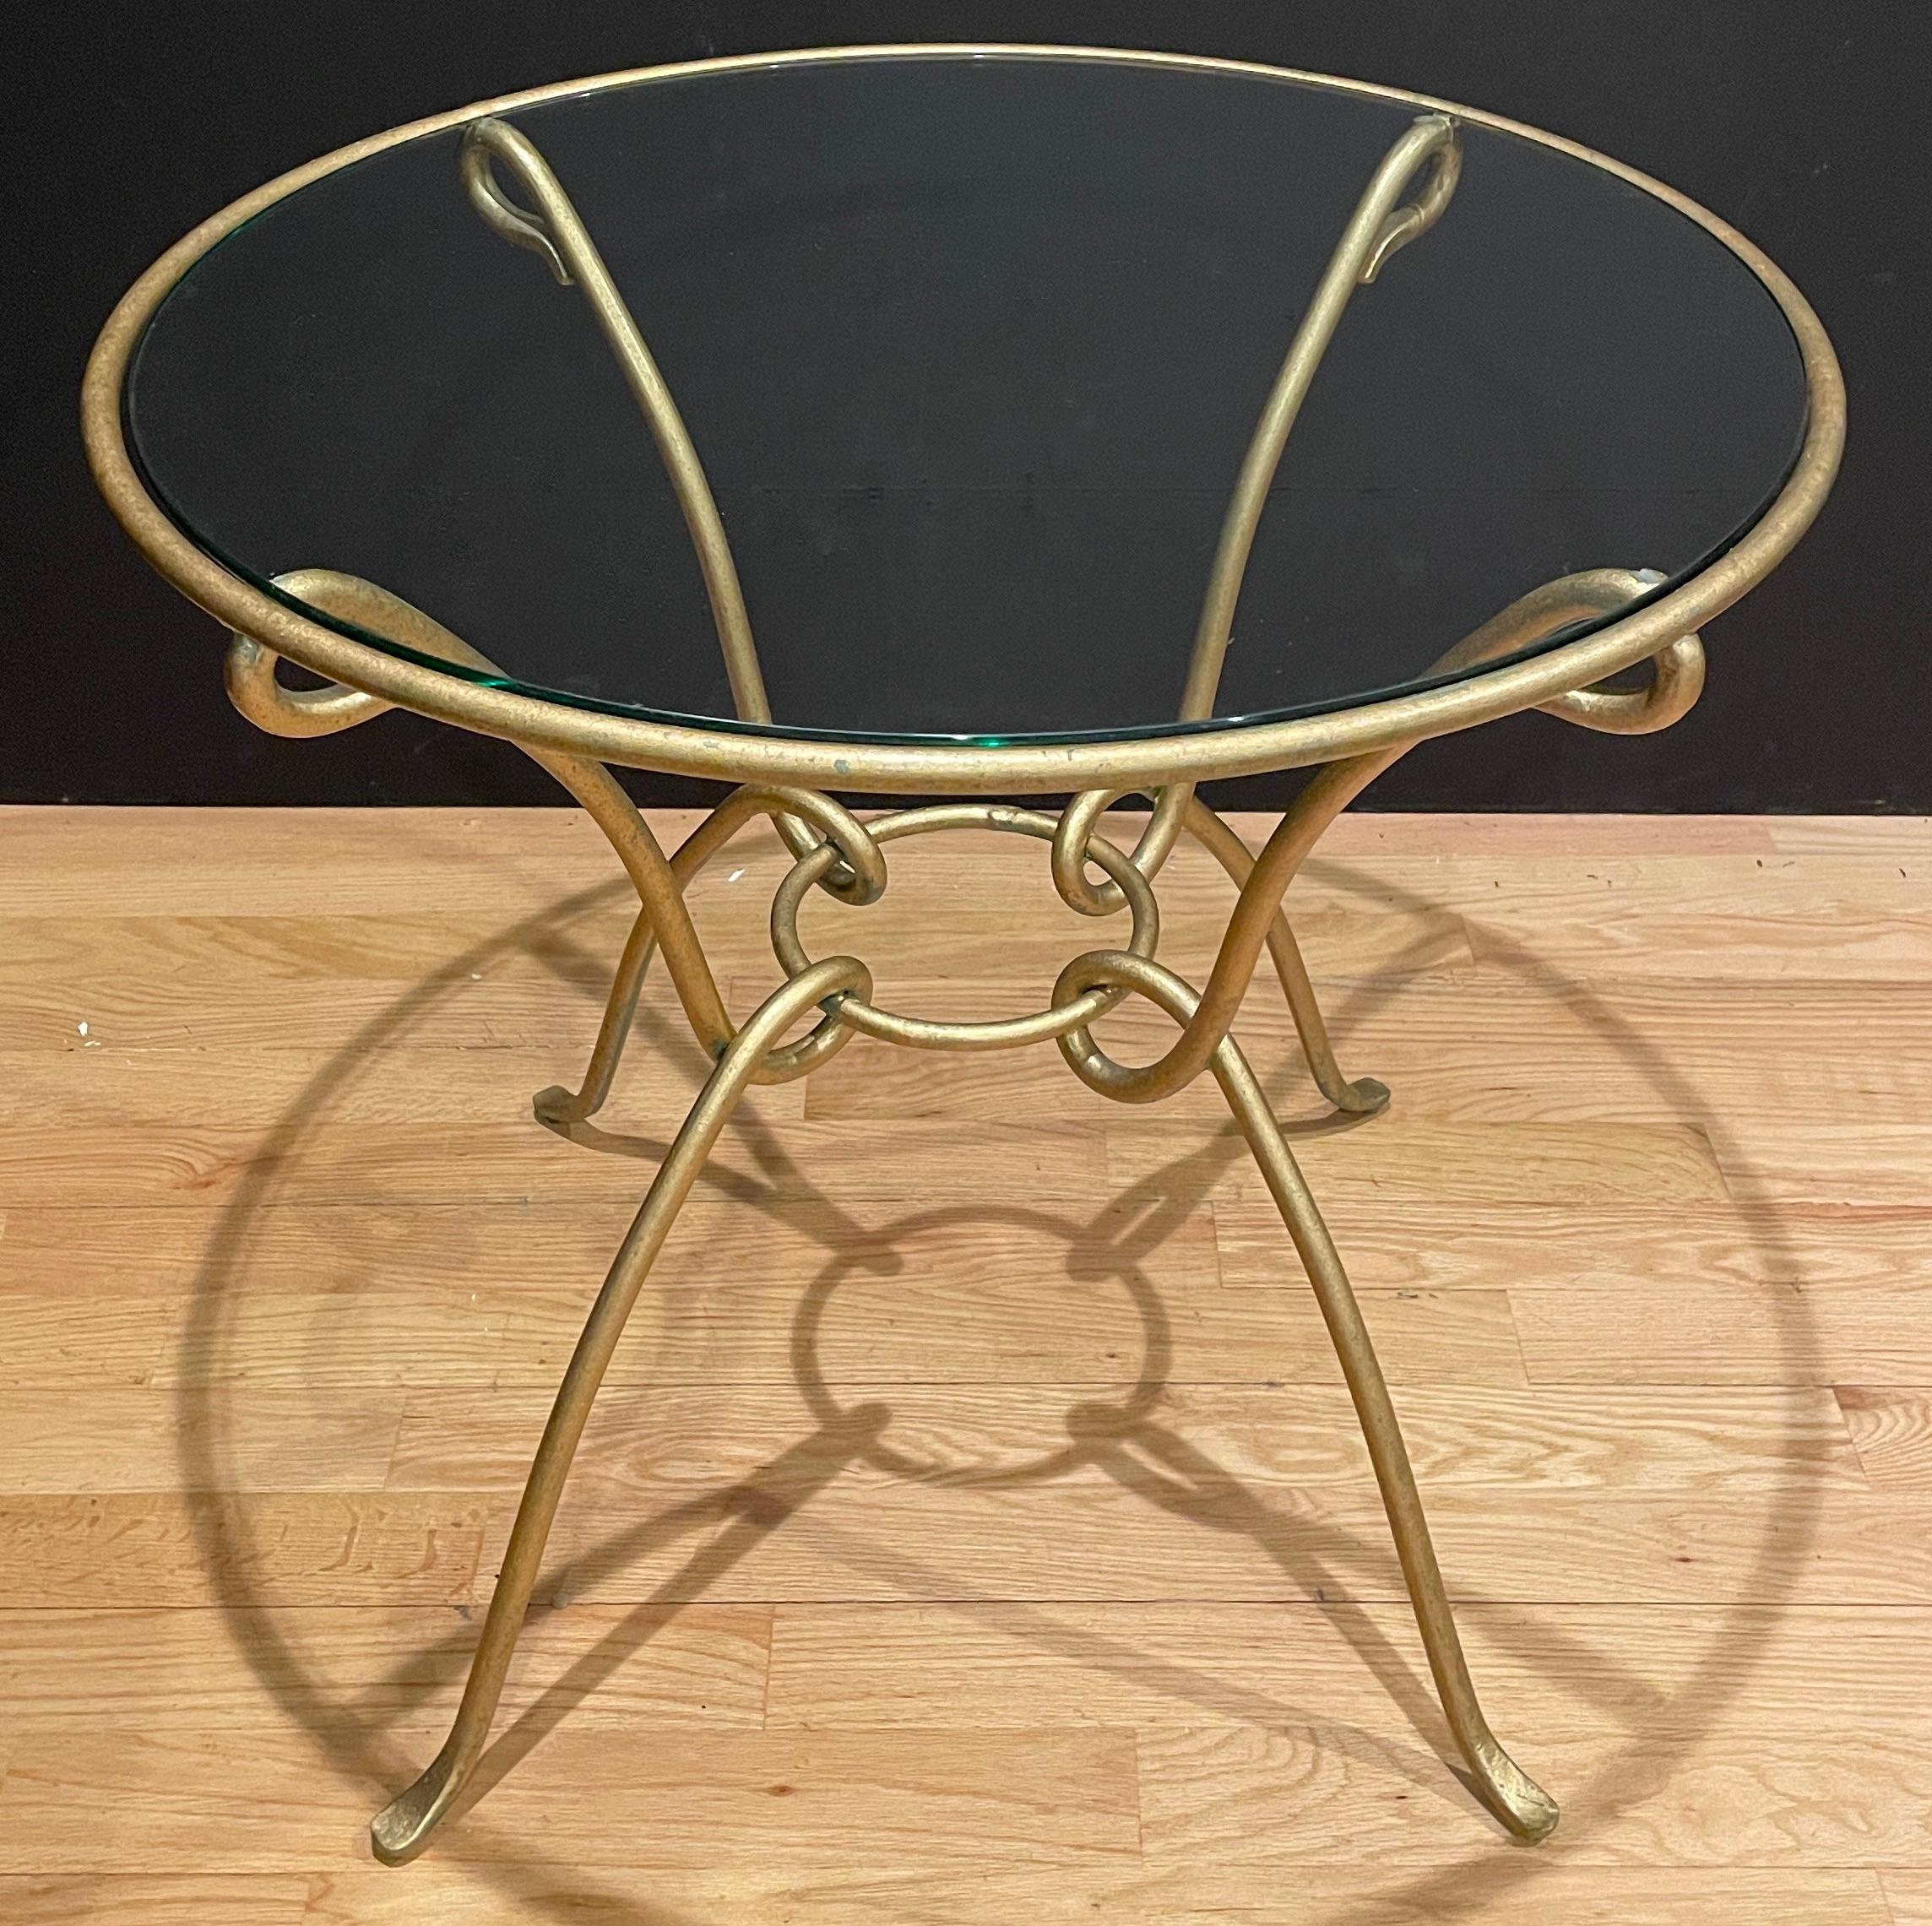 Minimal simplistic lines with an Art Nouveau feel, this Modern hand wrought iron, gilt finish table, can be used as an end table or center table. Glass top completes a light and elegant look.